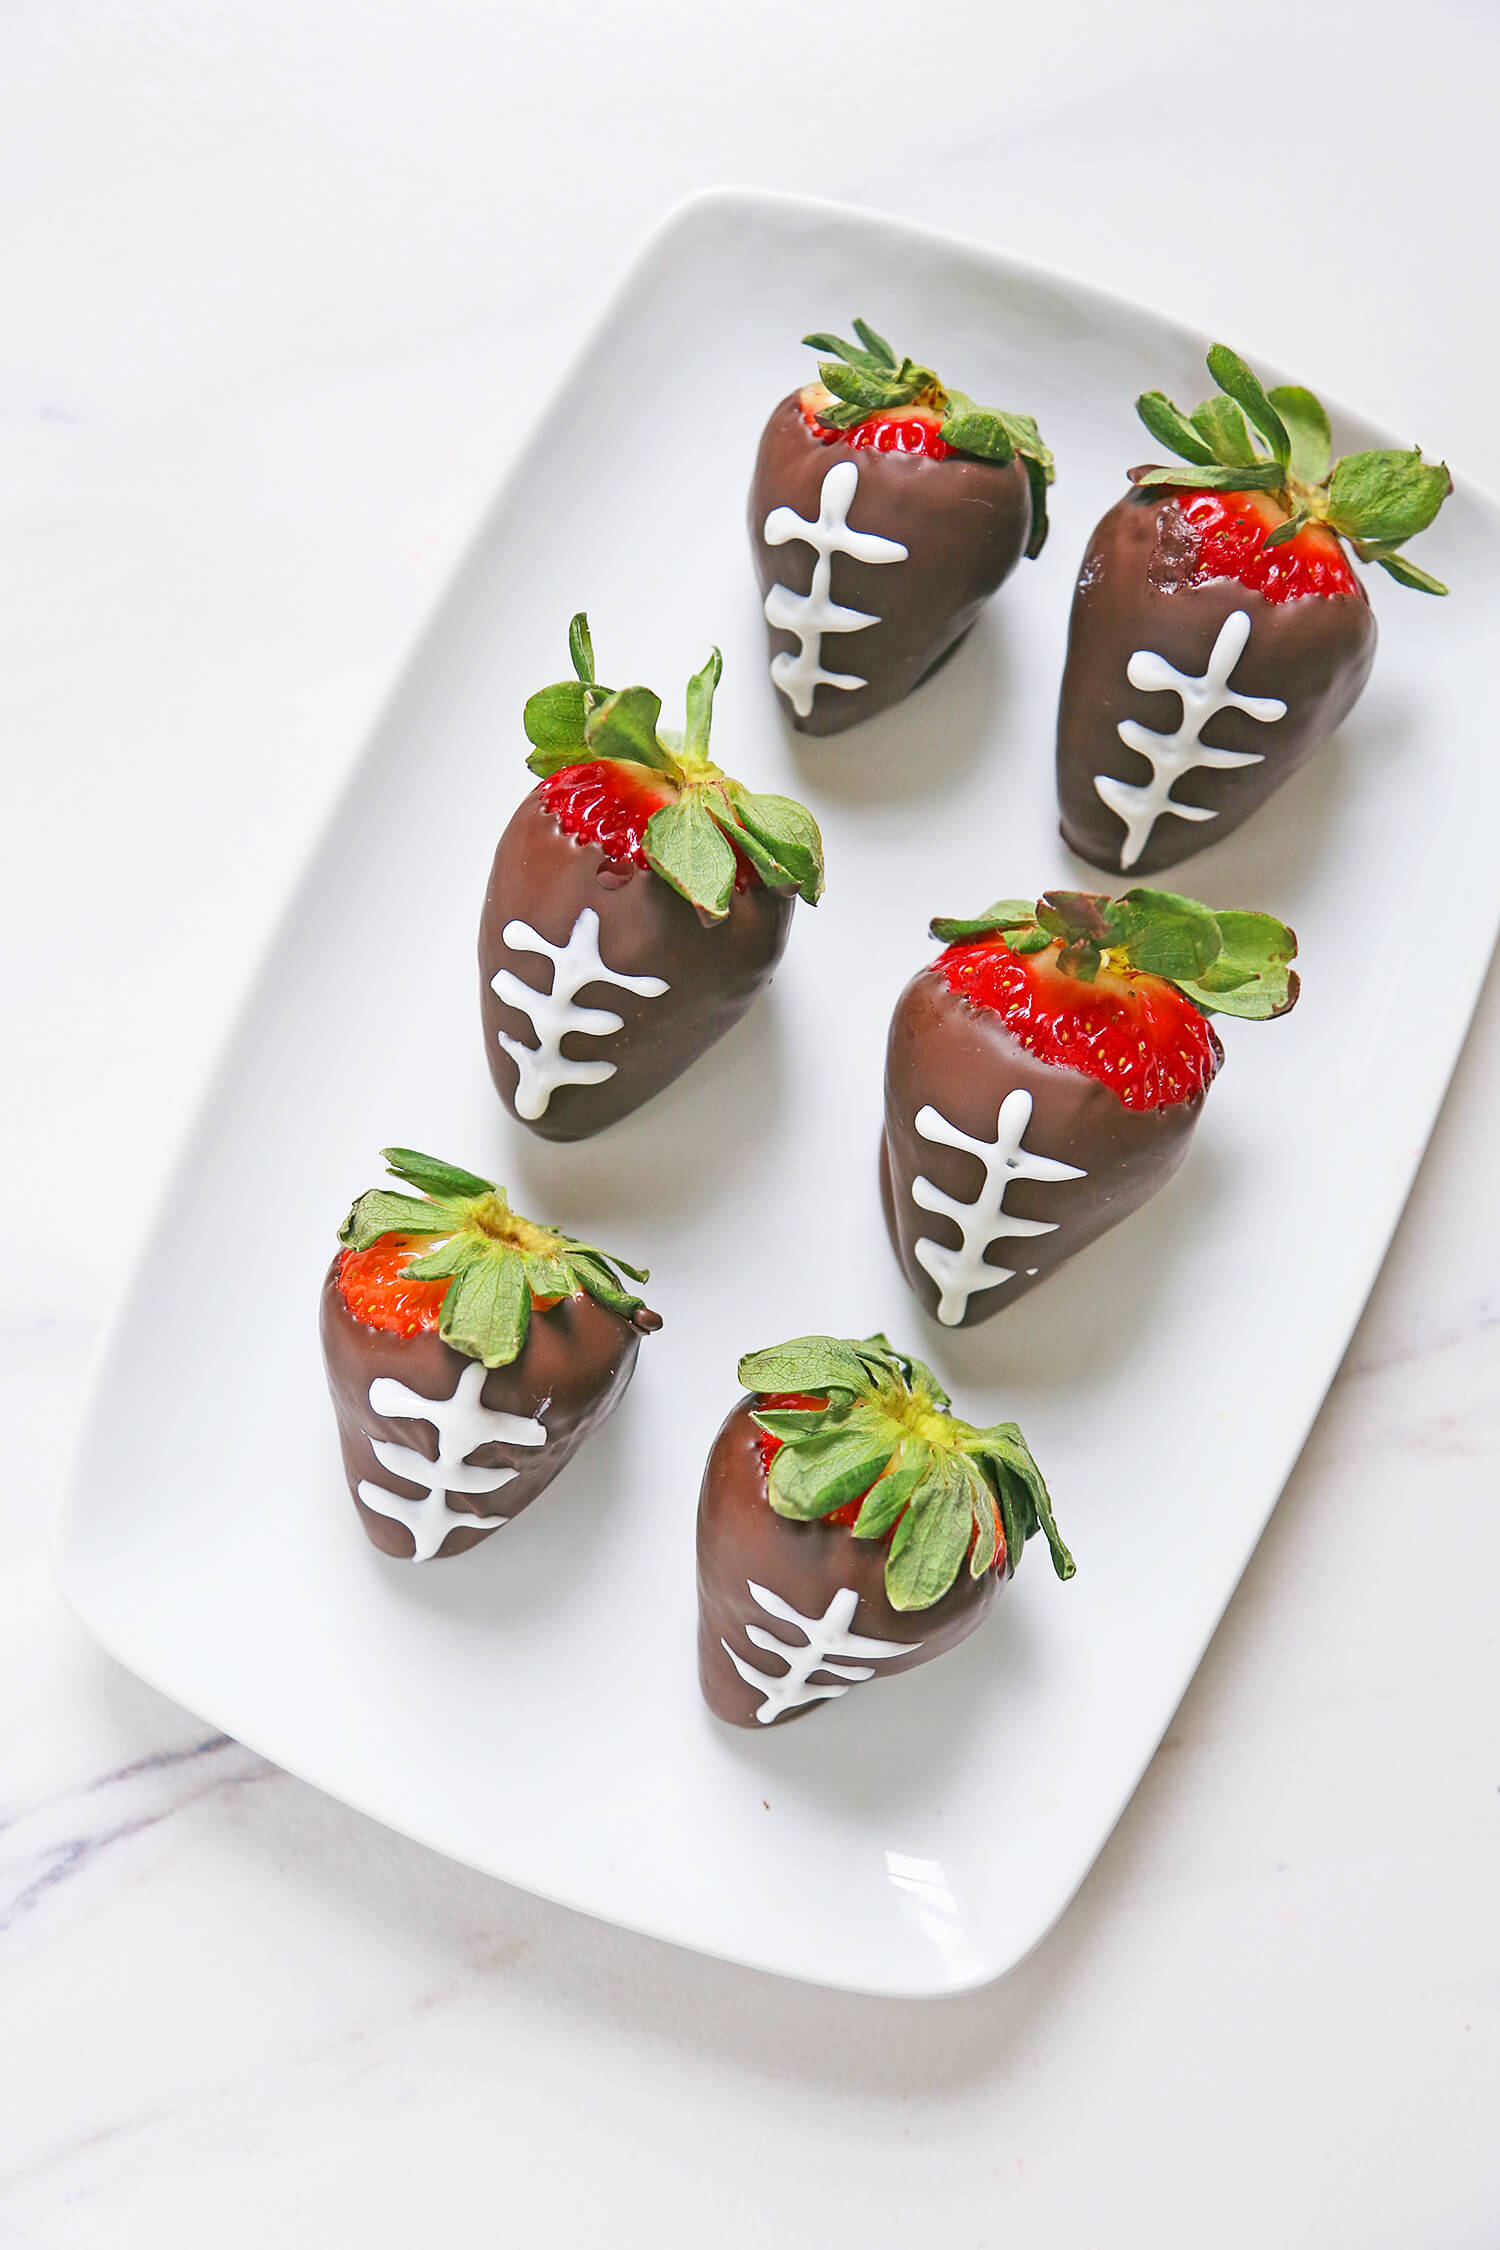 Chocolate Covered Strawberry Footballs - Super Bowl Party Ideas